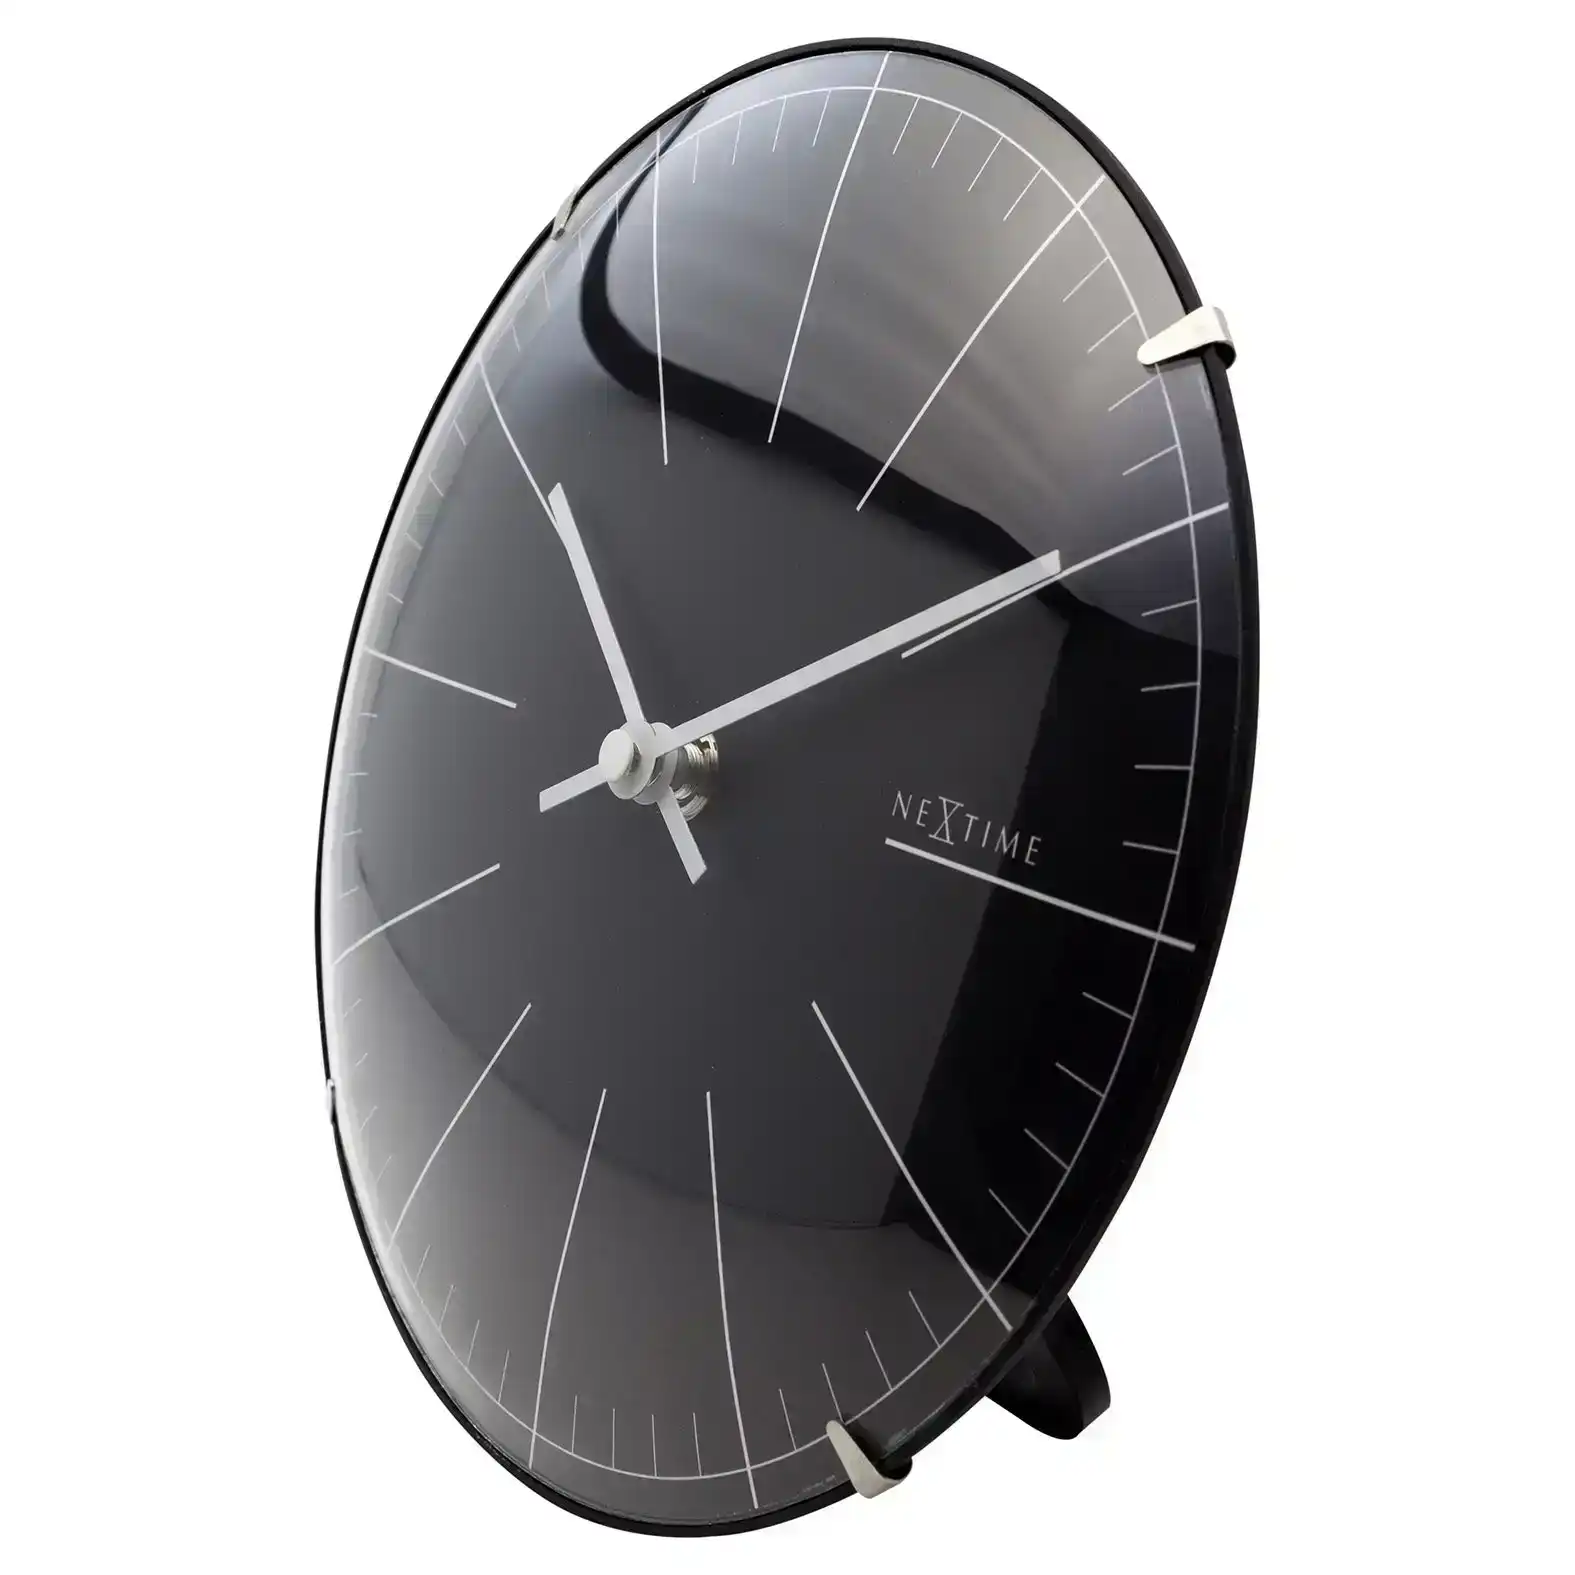 NeXtime 20cm Mini Dome Analogue Table/Wall Clock Round Home/Office Decor Black